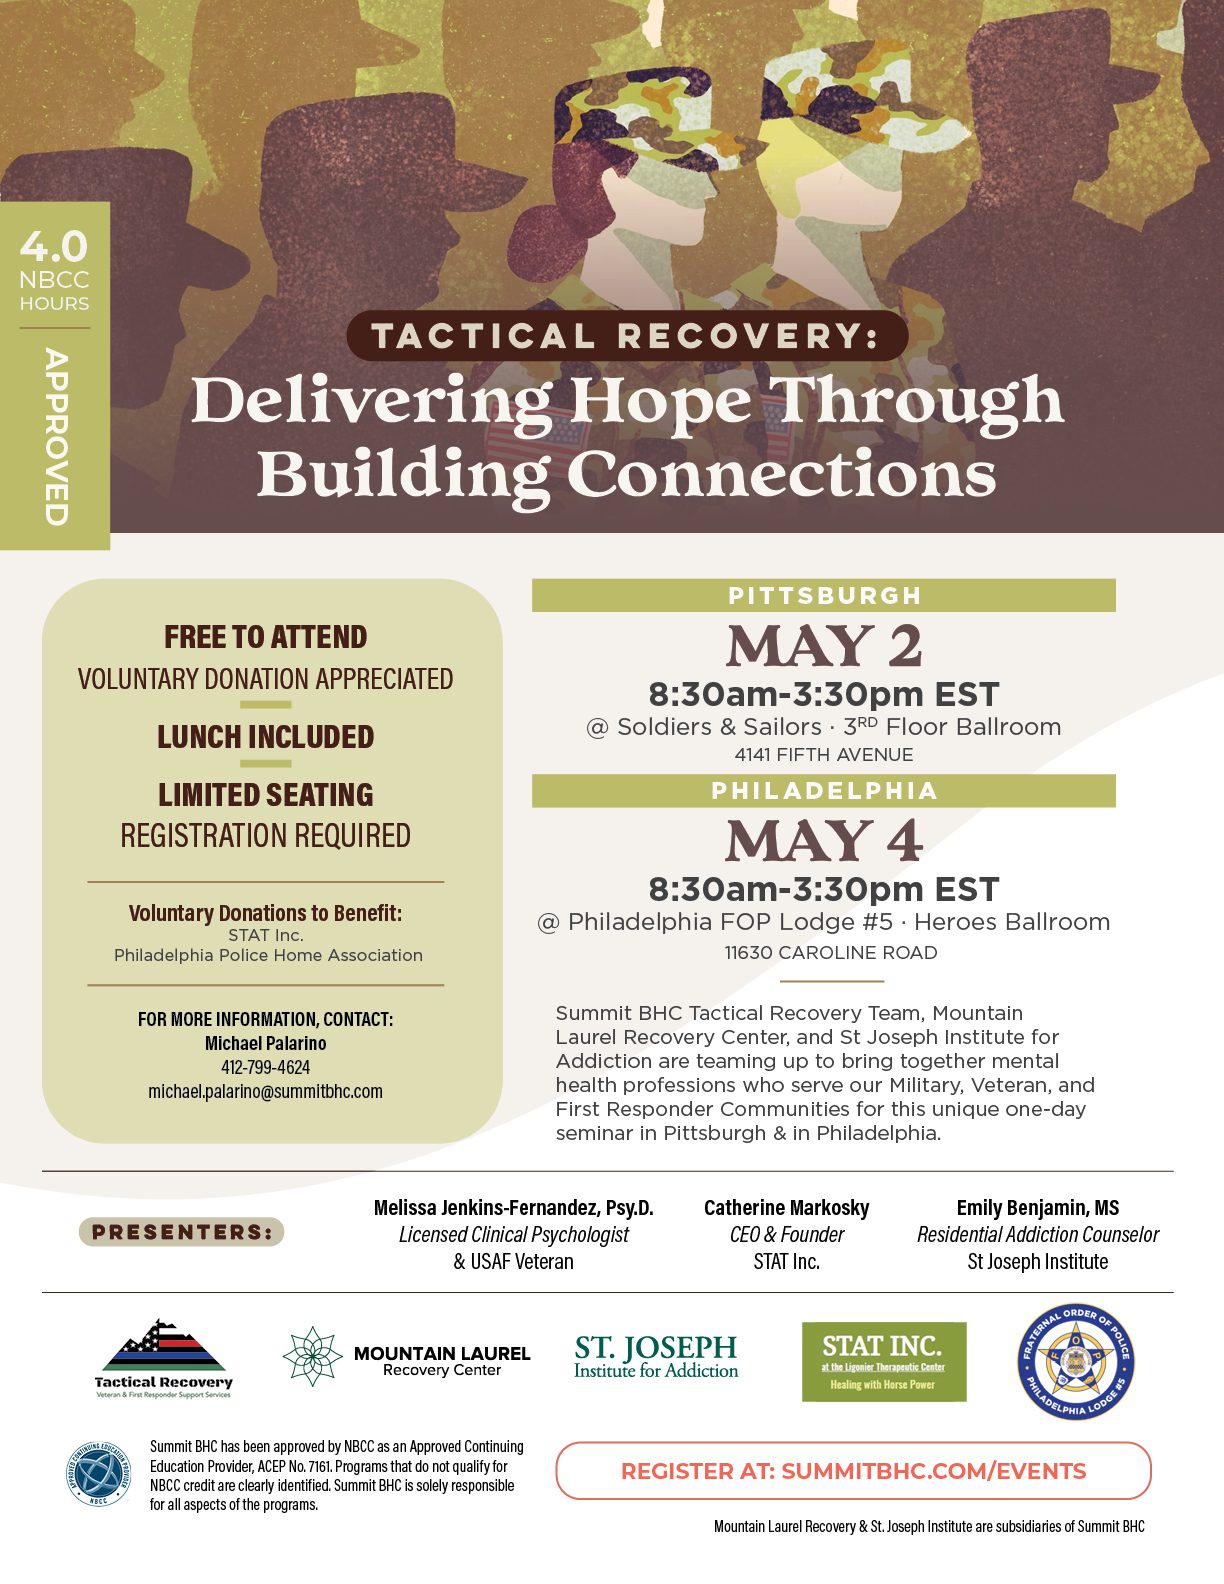 Delivering Hope Through Building Connections